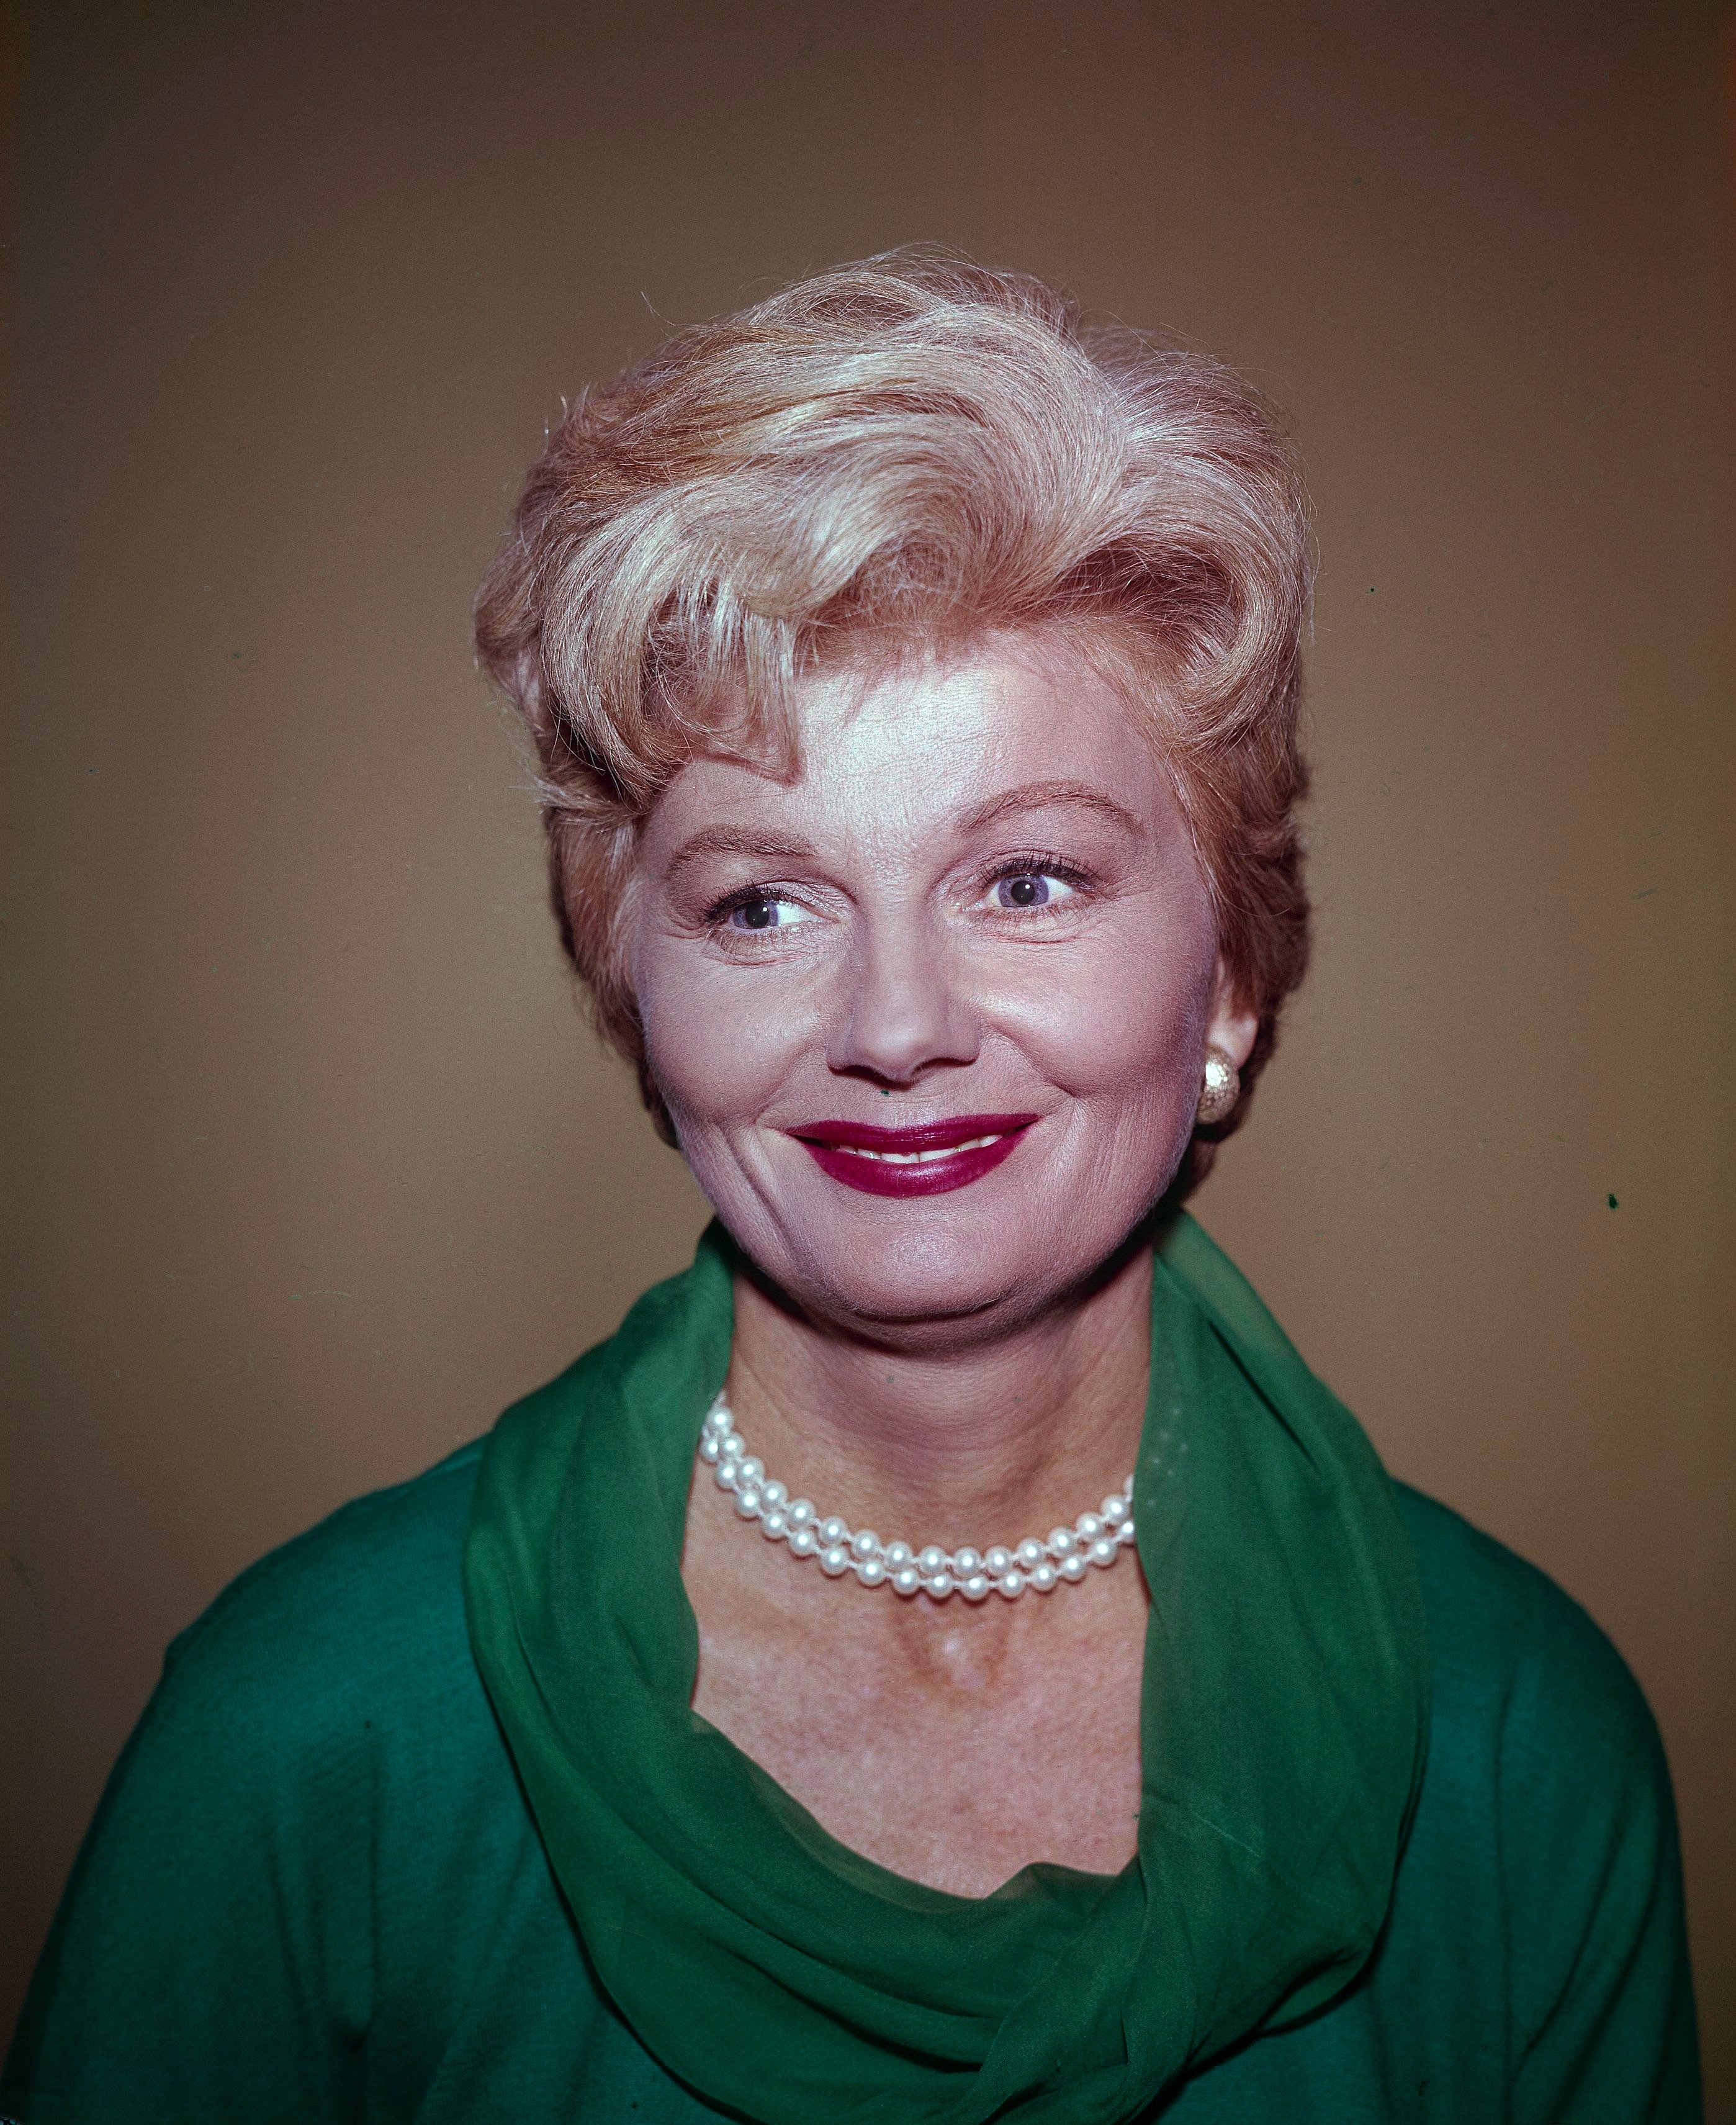 'Leave It to Beaver' actor Barbara Billingsley who portrayed June Cleaver in the series